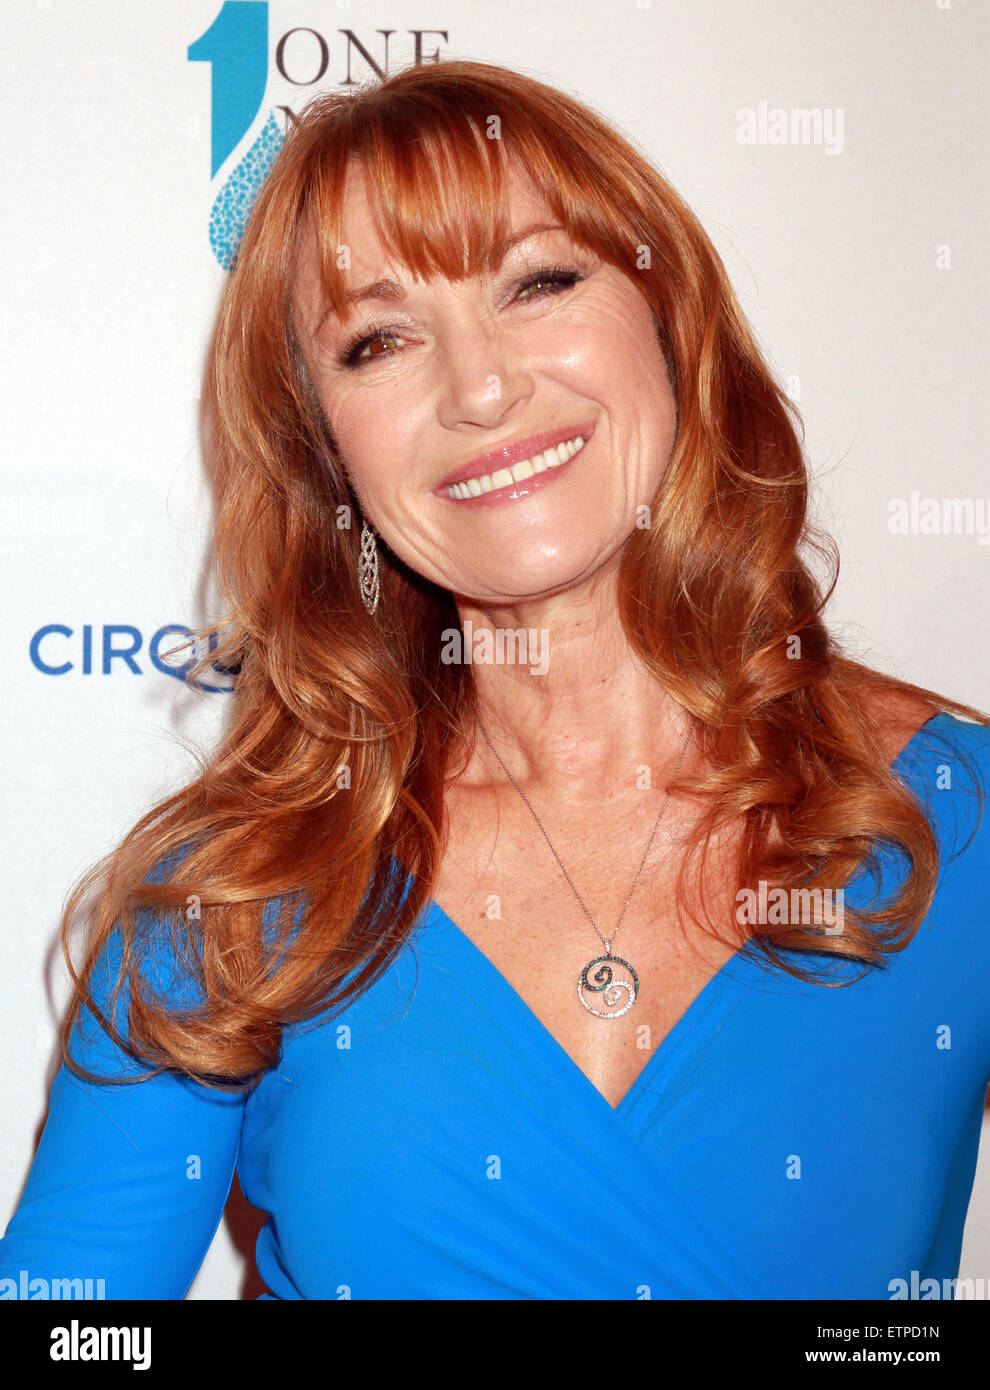 'One Night For ONE DROP' blue carpet event at 1 OAK Nightclub at The Mirage Hotel & Casino  Featuring: Jane Seymour Where: Las Vegas, Nevada, United States When: 20 Mar 2015 Credit: DJDM/WENN.com Stock Photo